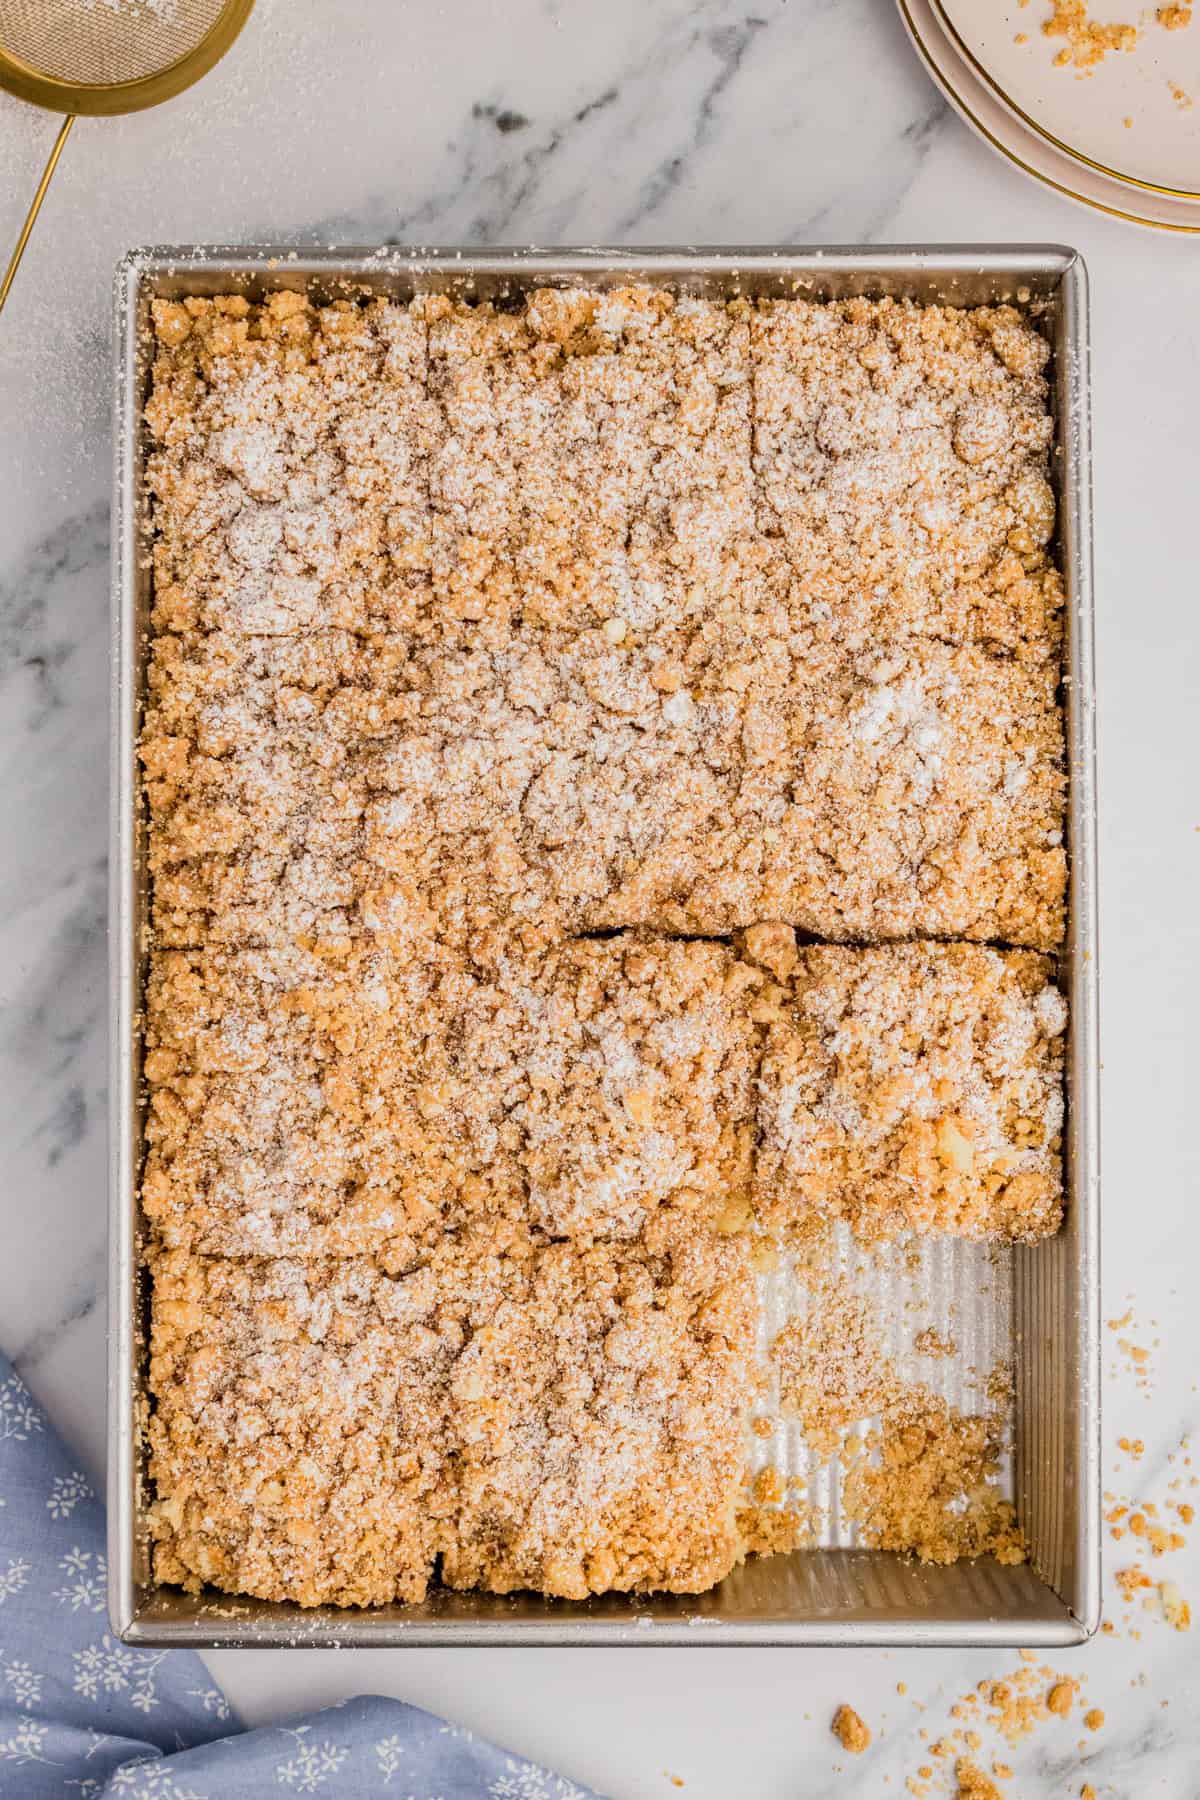 New York style crumb cake dusted with powdered sugar and sliced into squares.